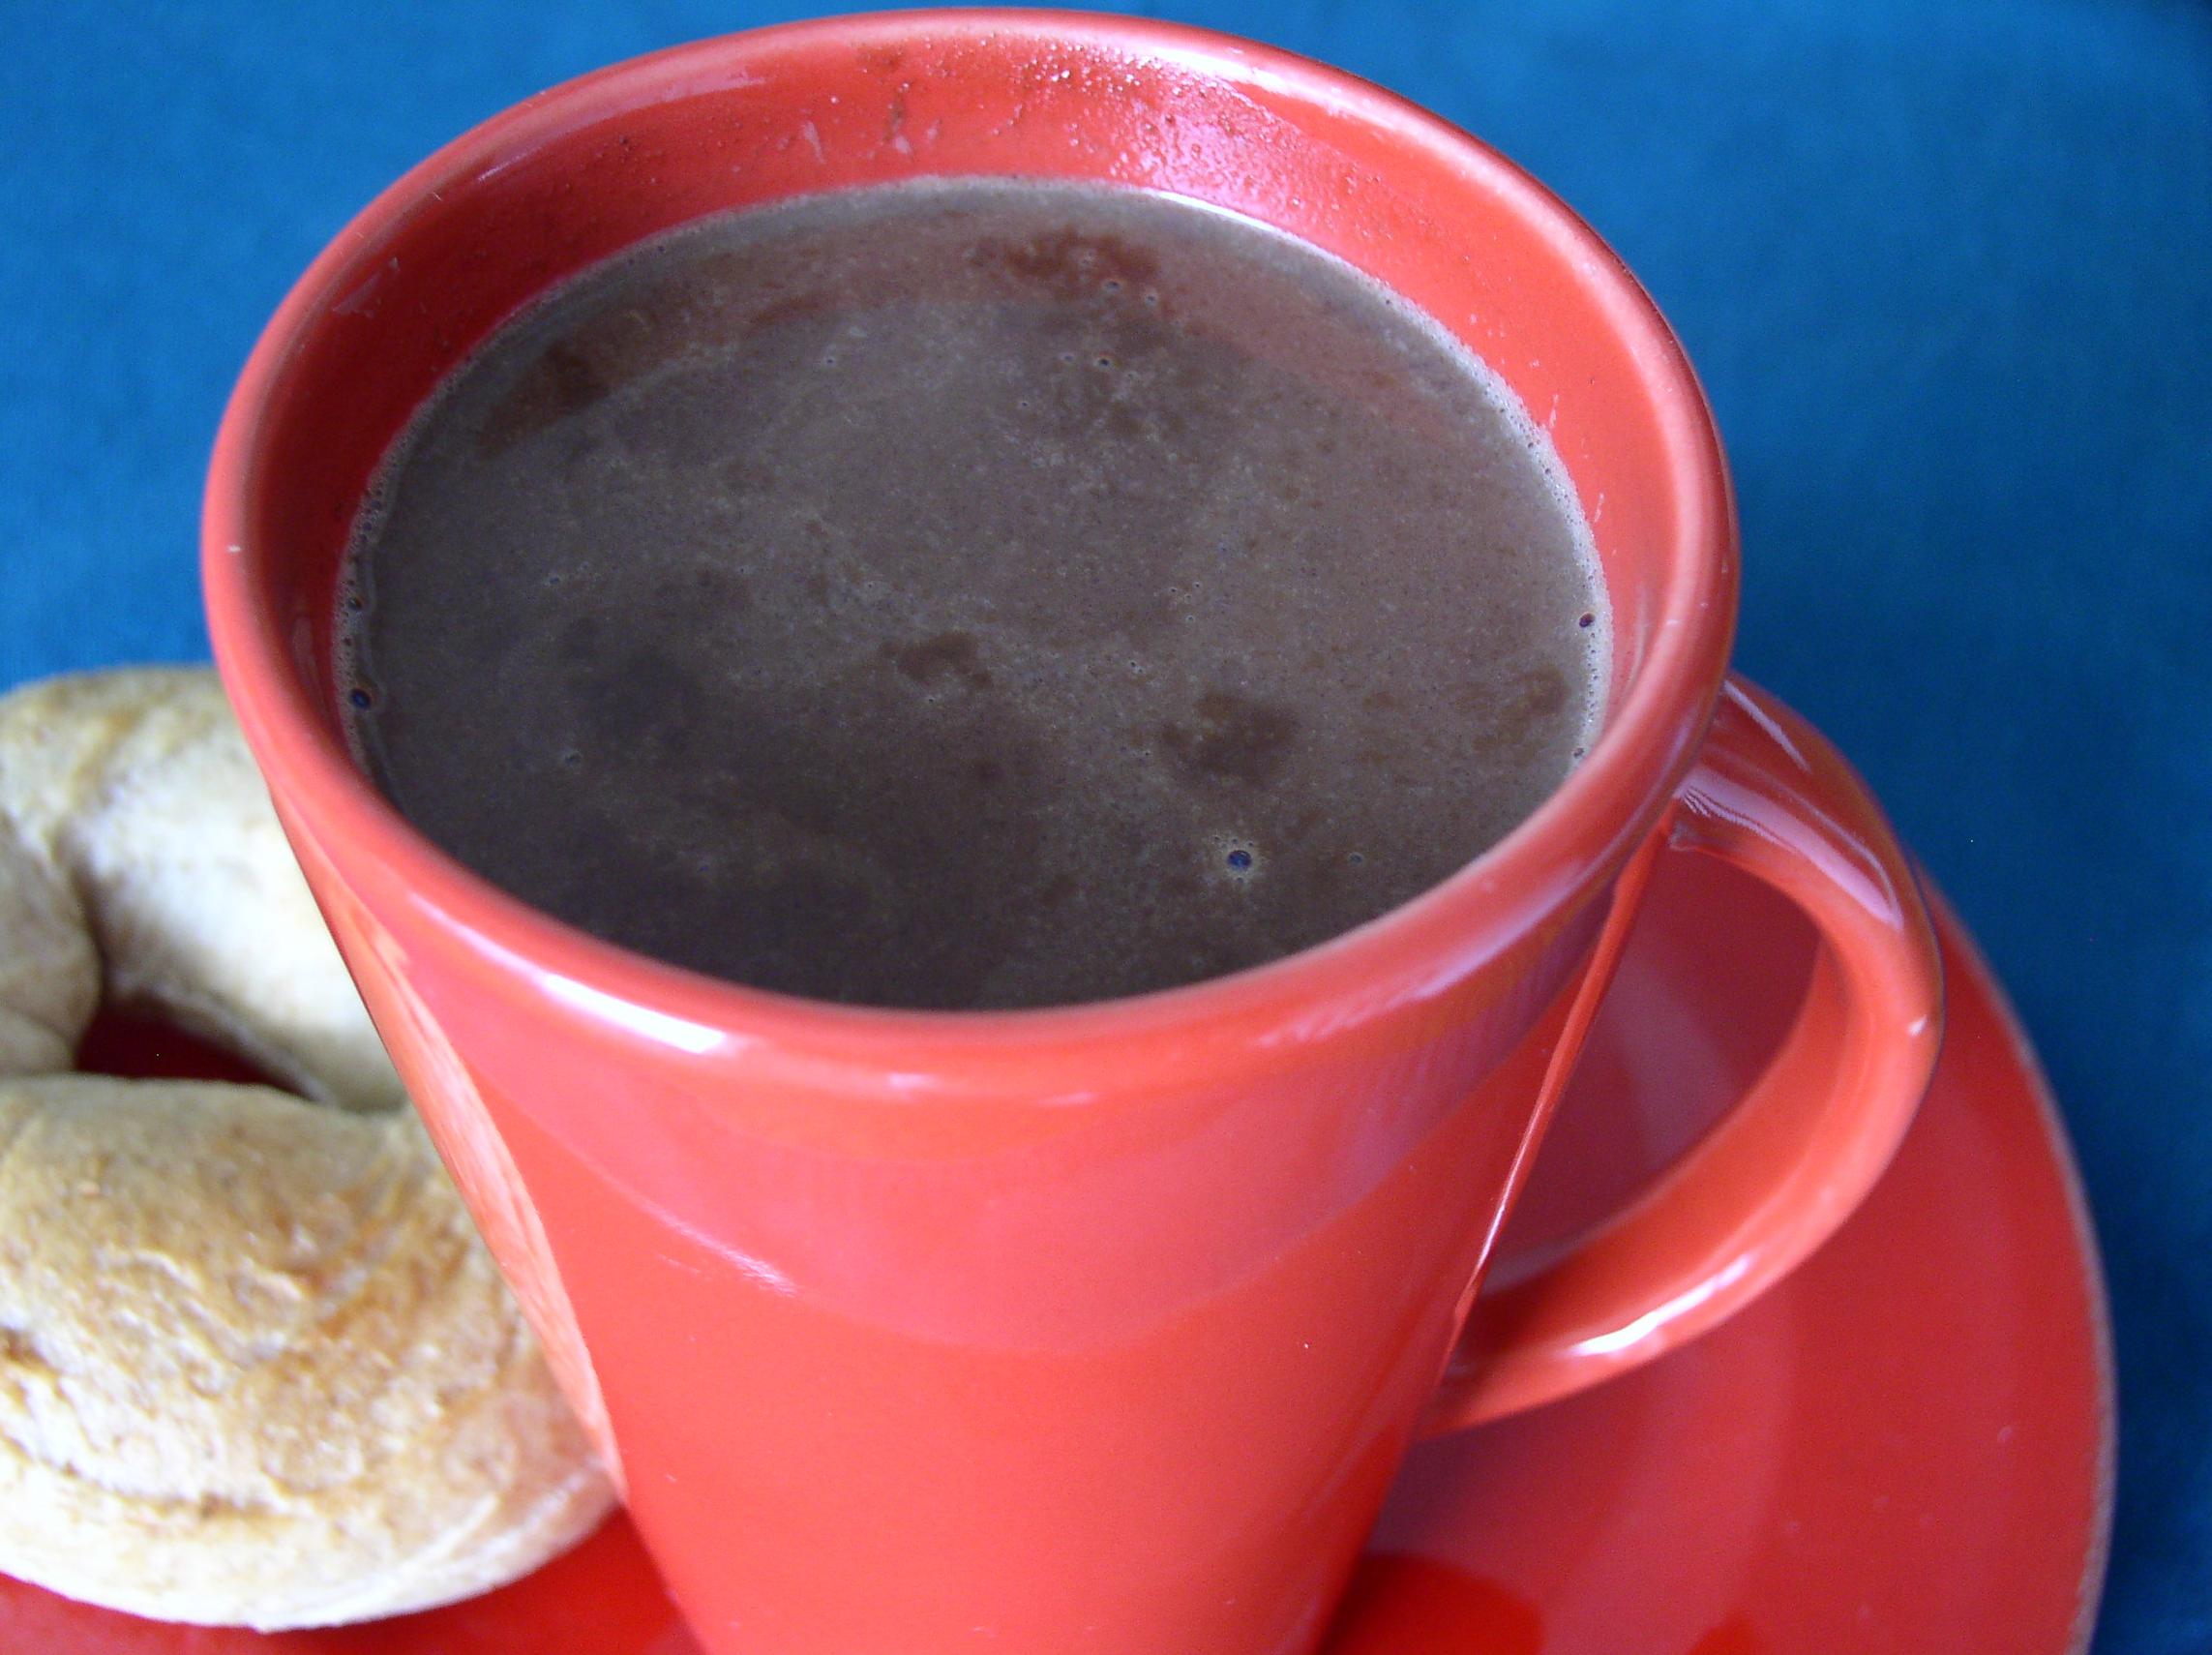  Cozy up with a mug of this warm and indulgent drink on a chilly night.